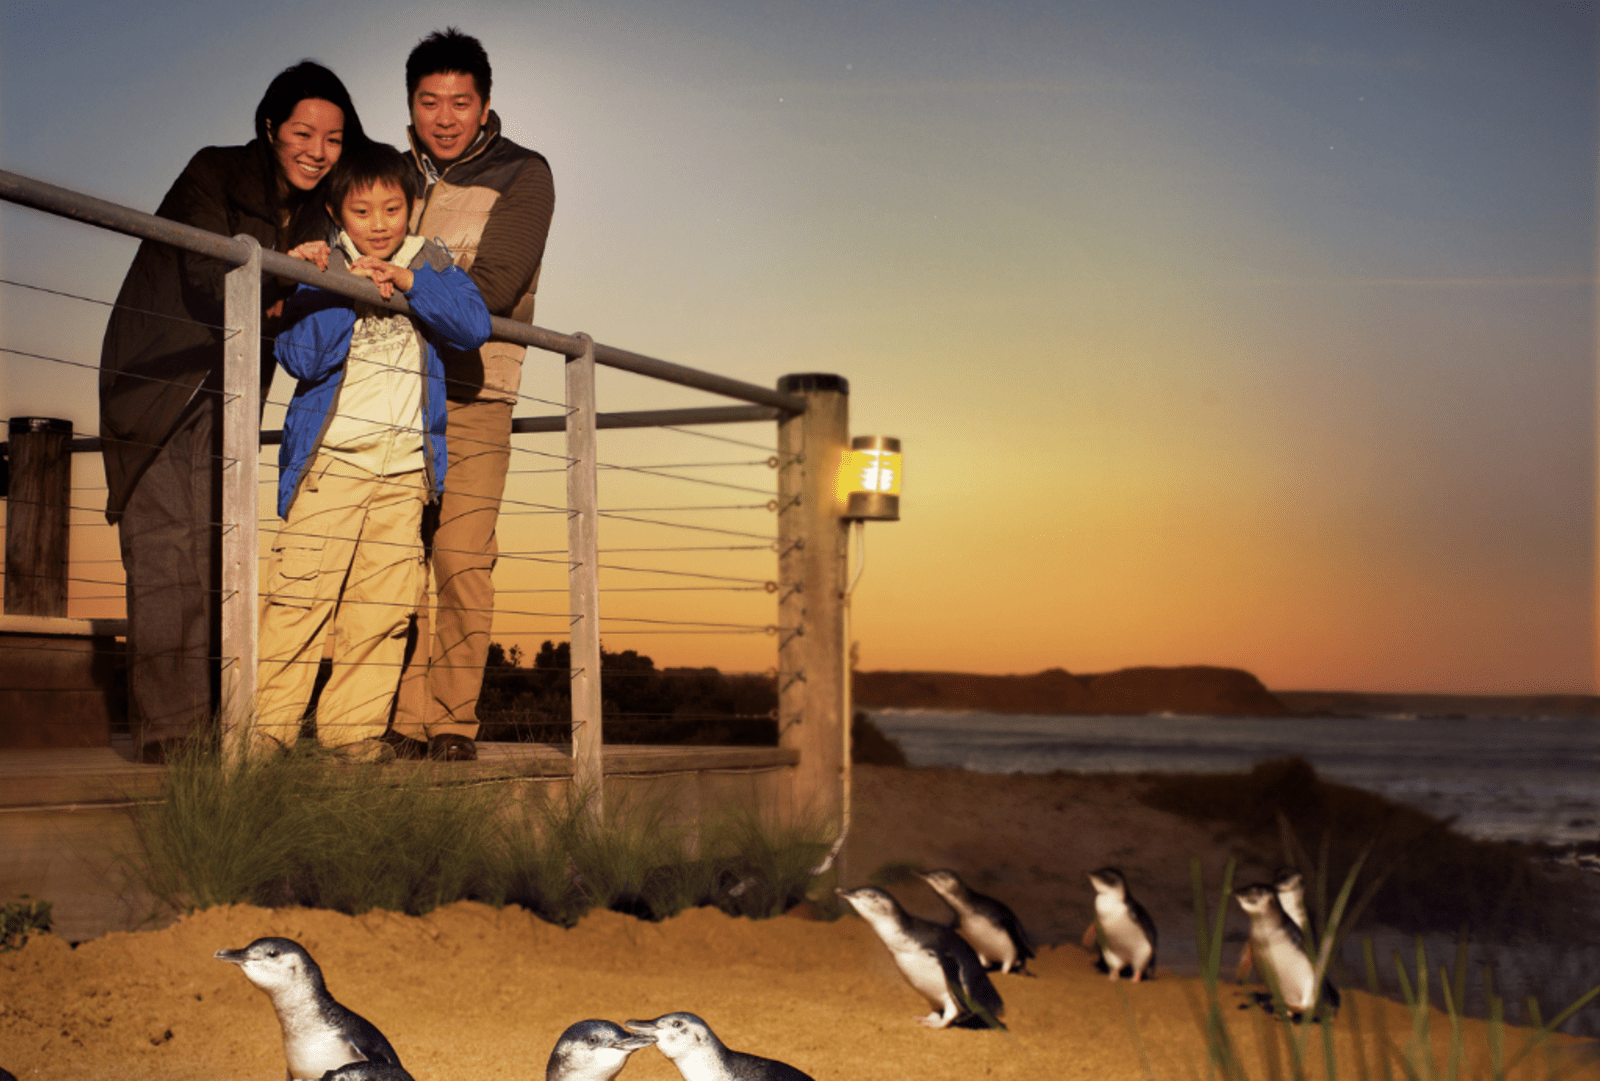 A family watches penguins on the beach at sunset on Philip Island